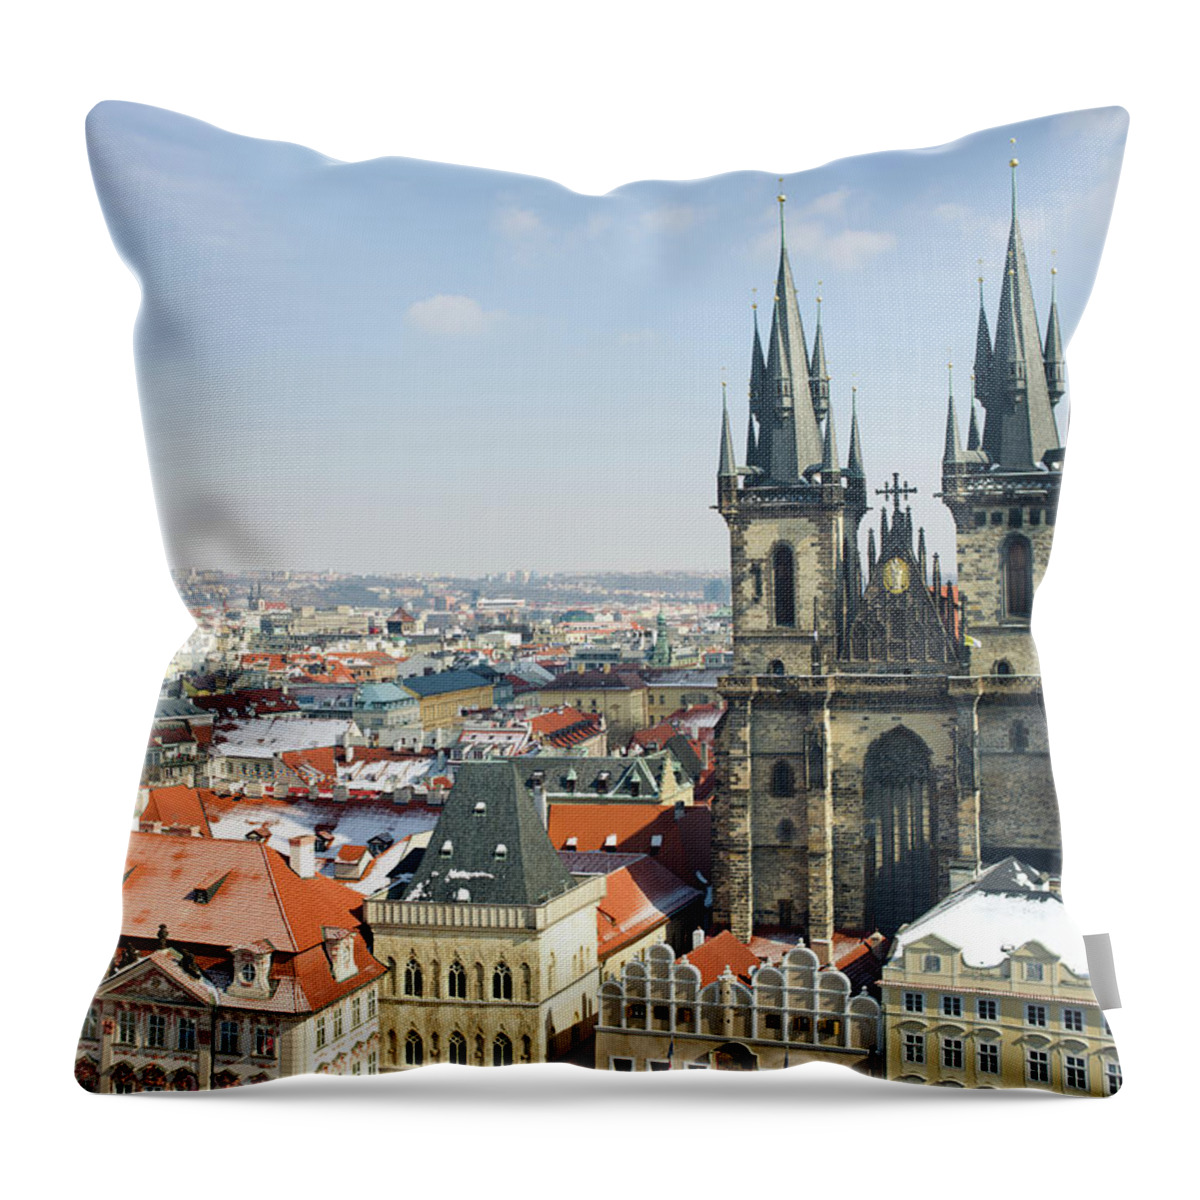 Arch Throw Pillow featuring the photograph Tyn Church In Prague Old Town Square by Uygar Ozel